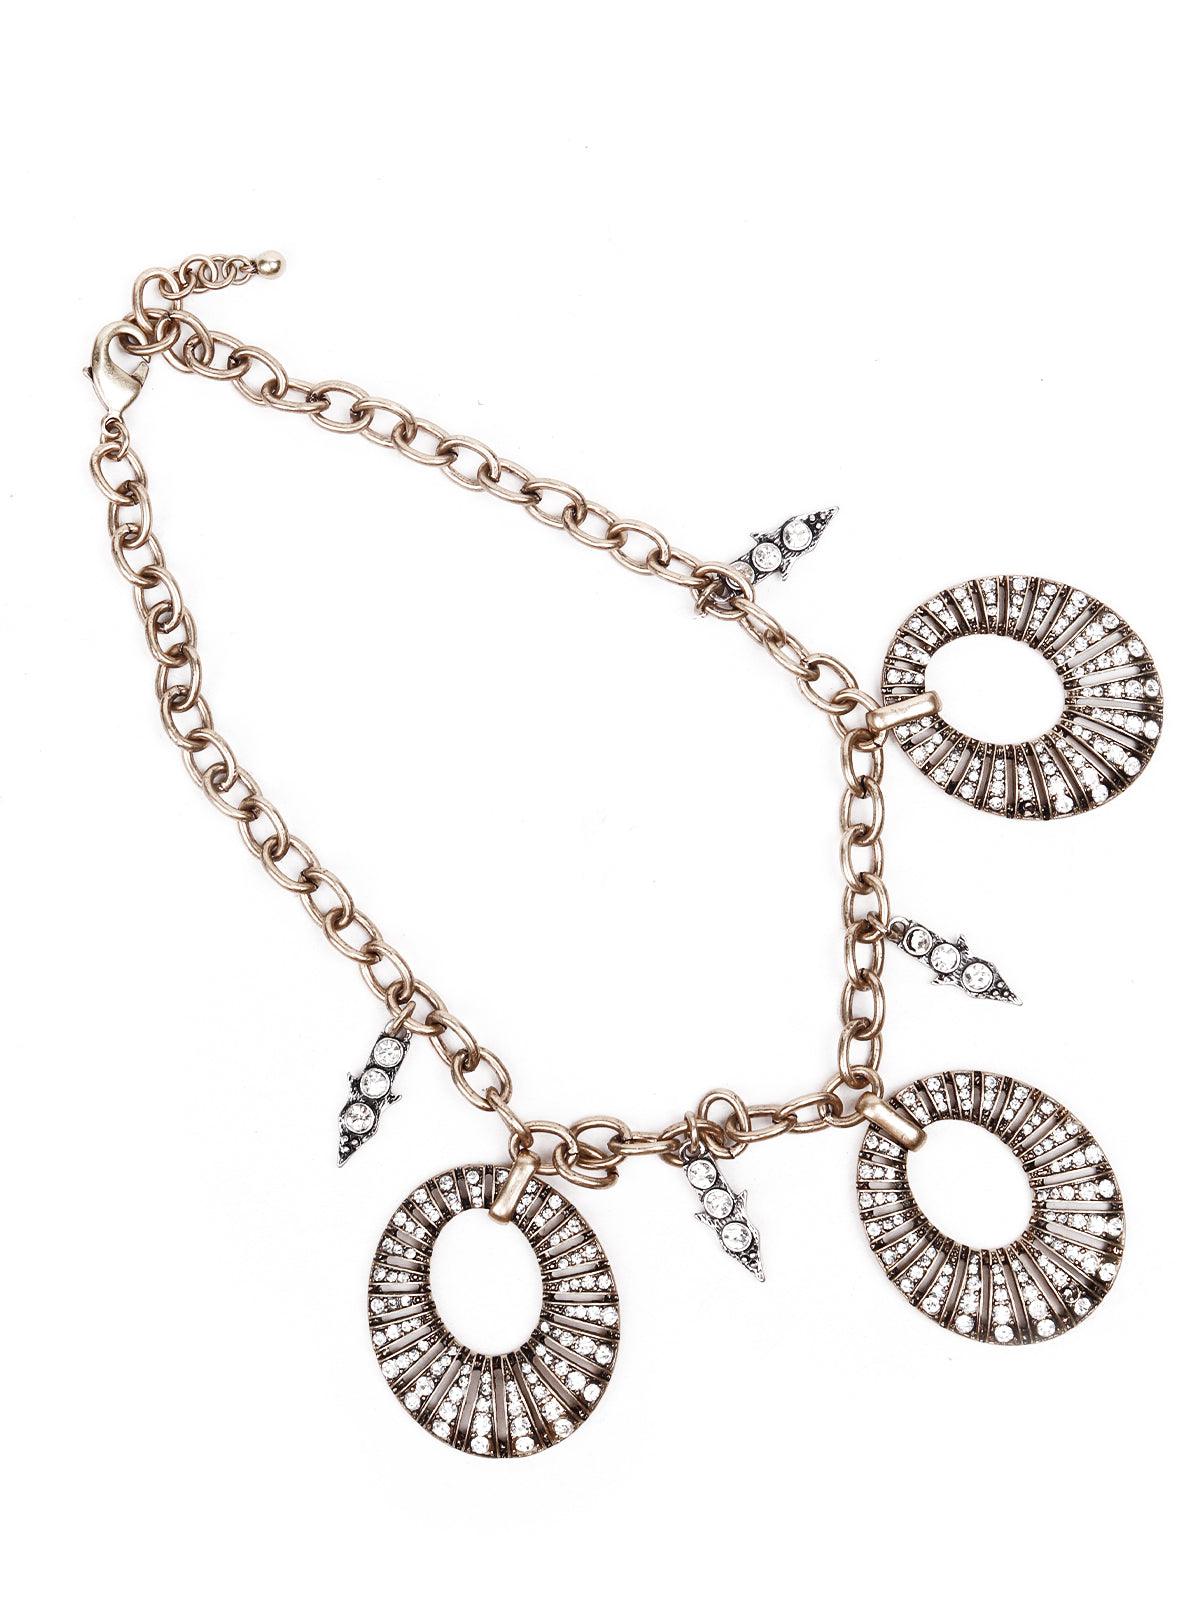 Statement necklace with rounded pendant - Odette